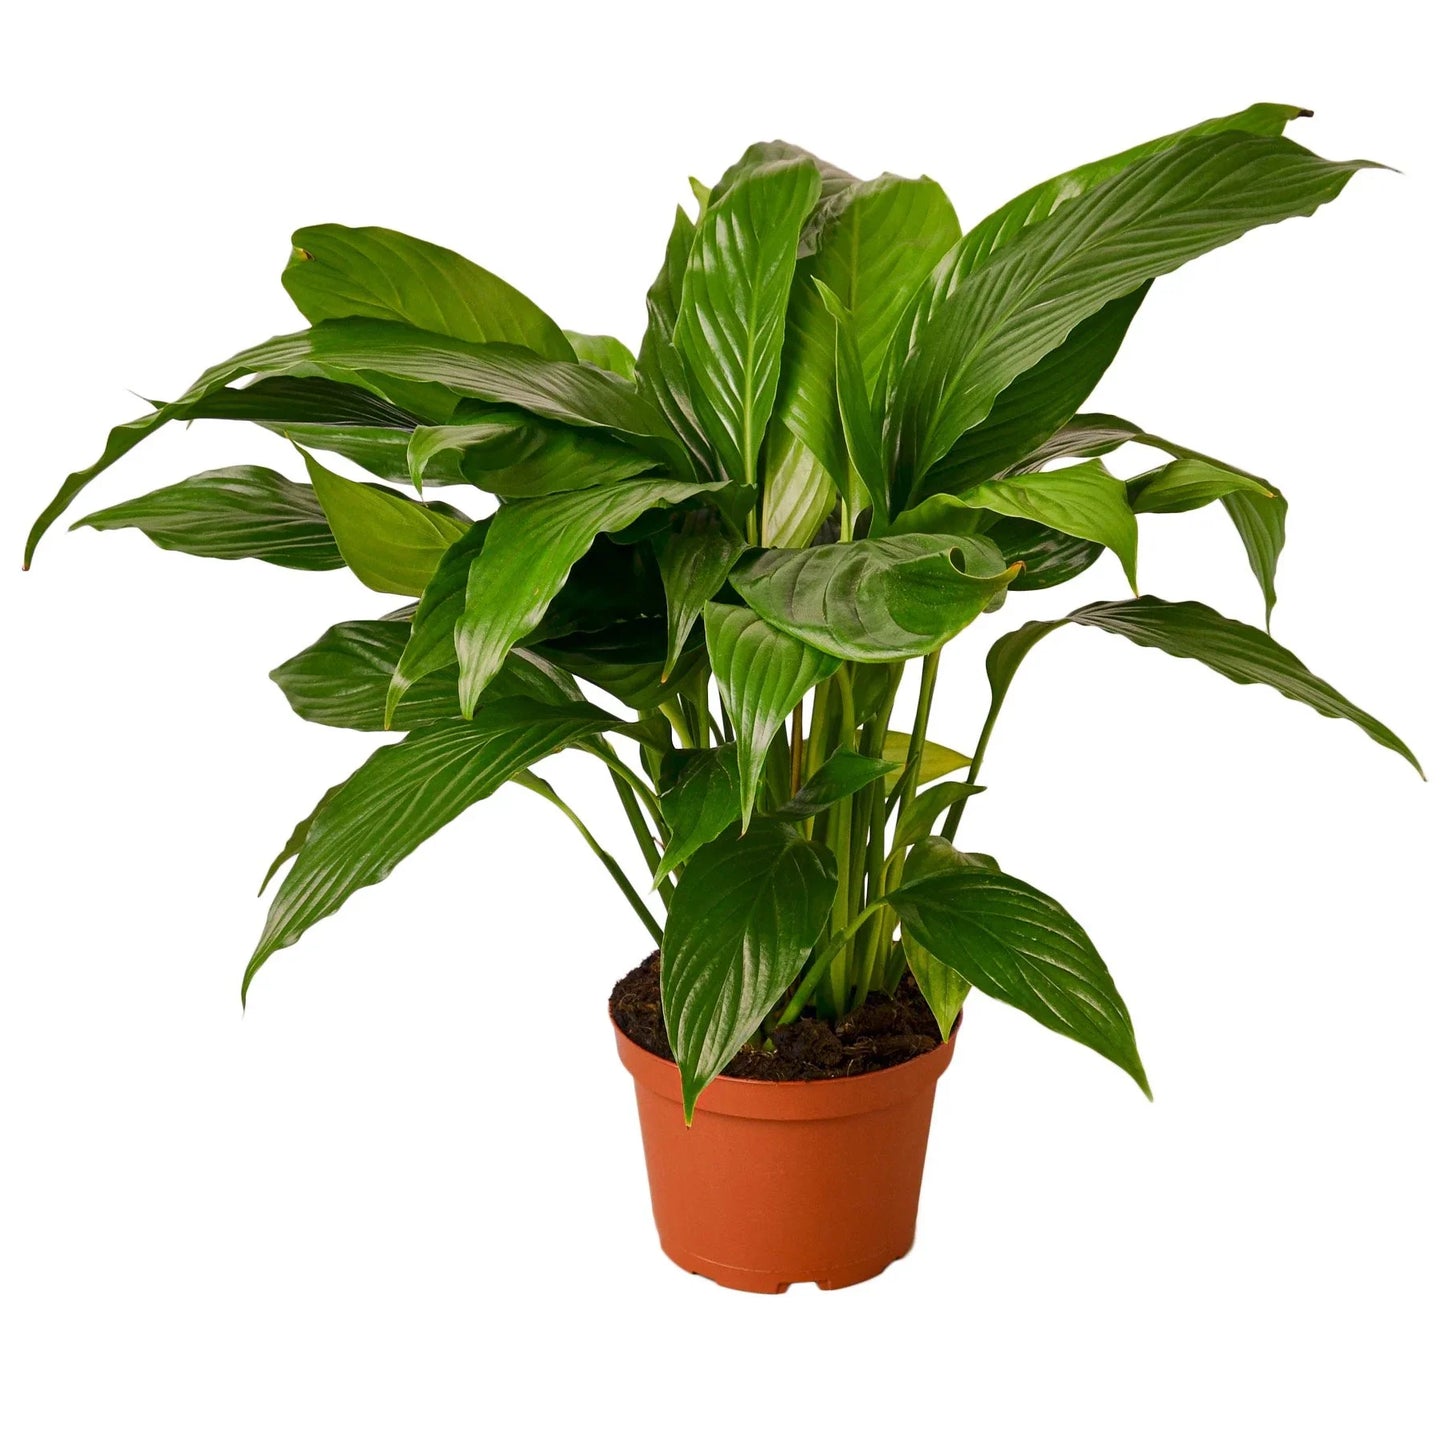 The Peace Lily - Easy Care, Air-Purifying Indoor Plant with Stunning Flowers